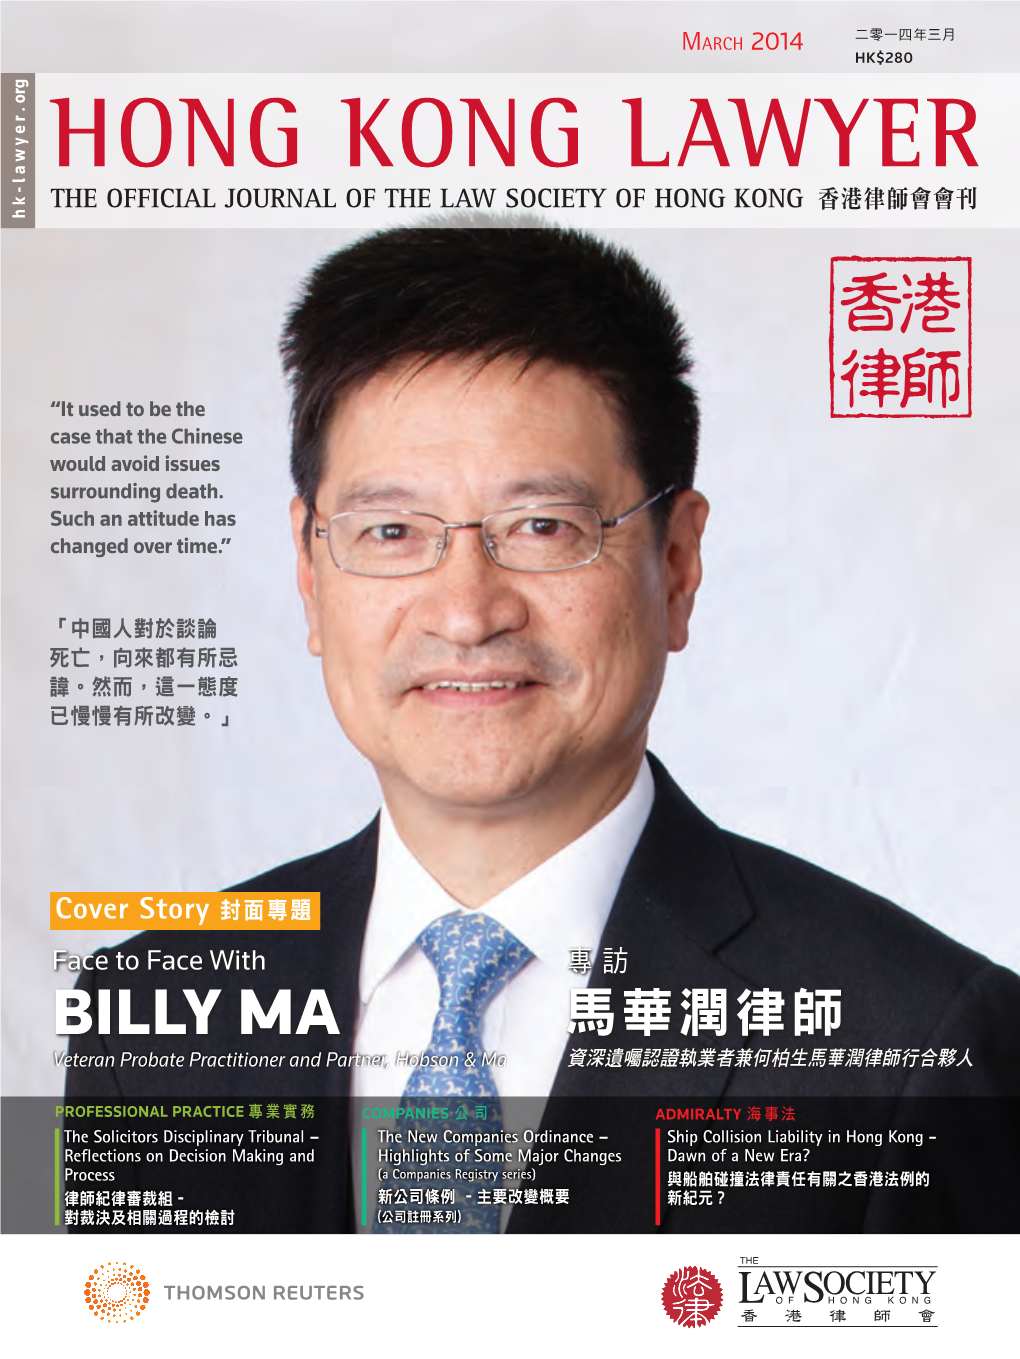 HONG KONG LAWYER the OFFICIAL JOURNAL of the LAW SOCIETY of HONG KONG 香港律師會會刊 H K - L a W Y E R